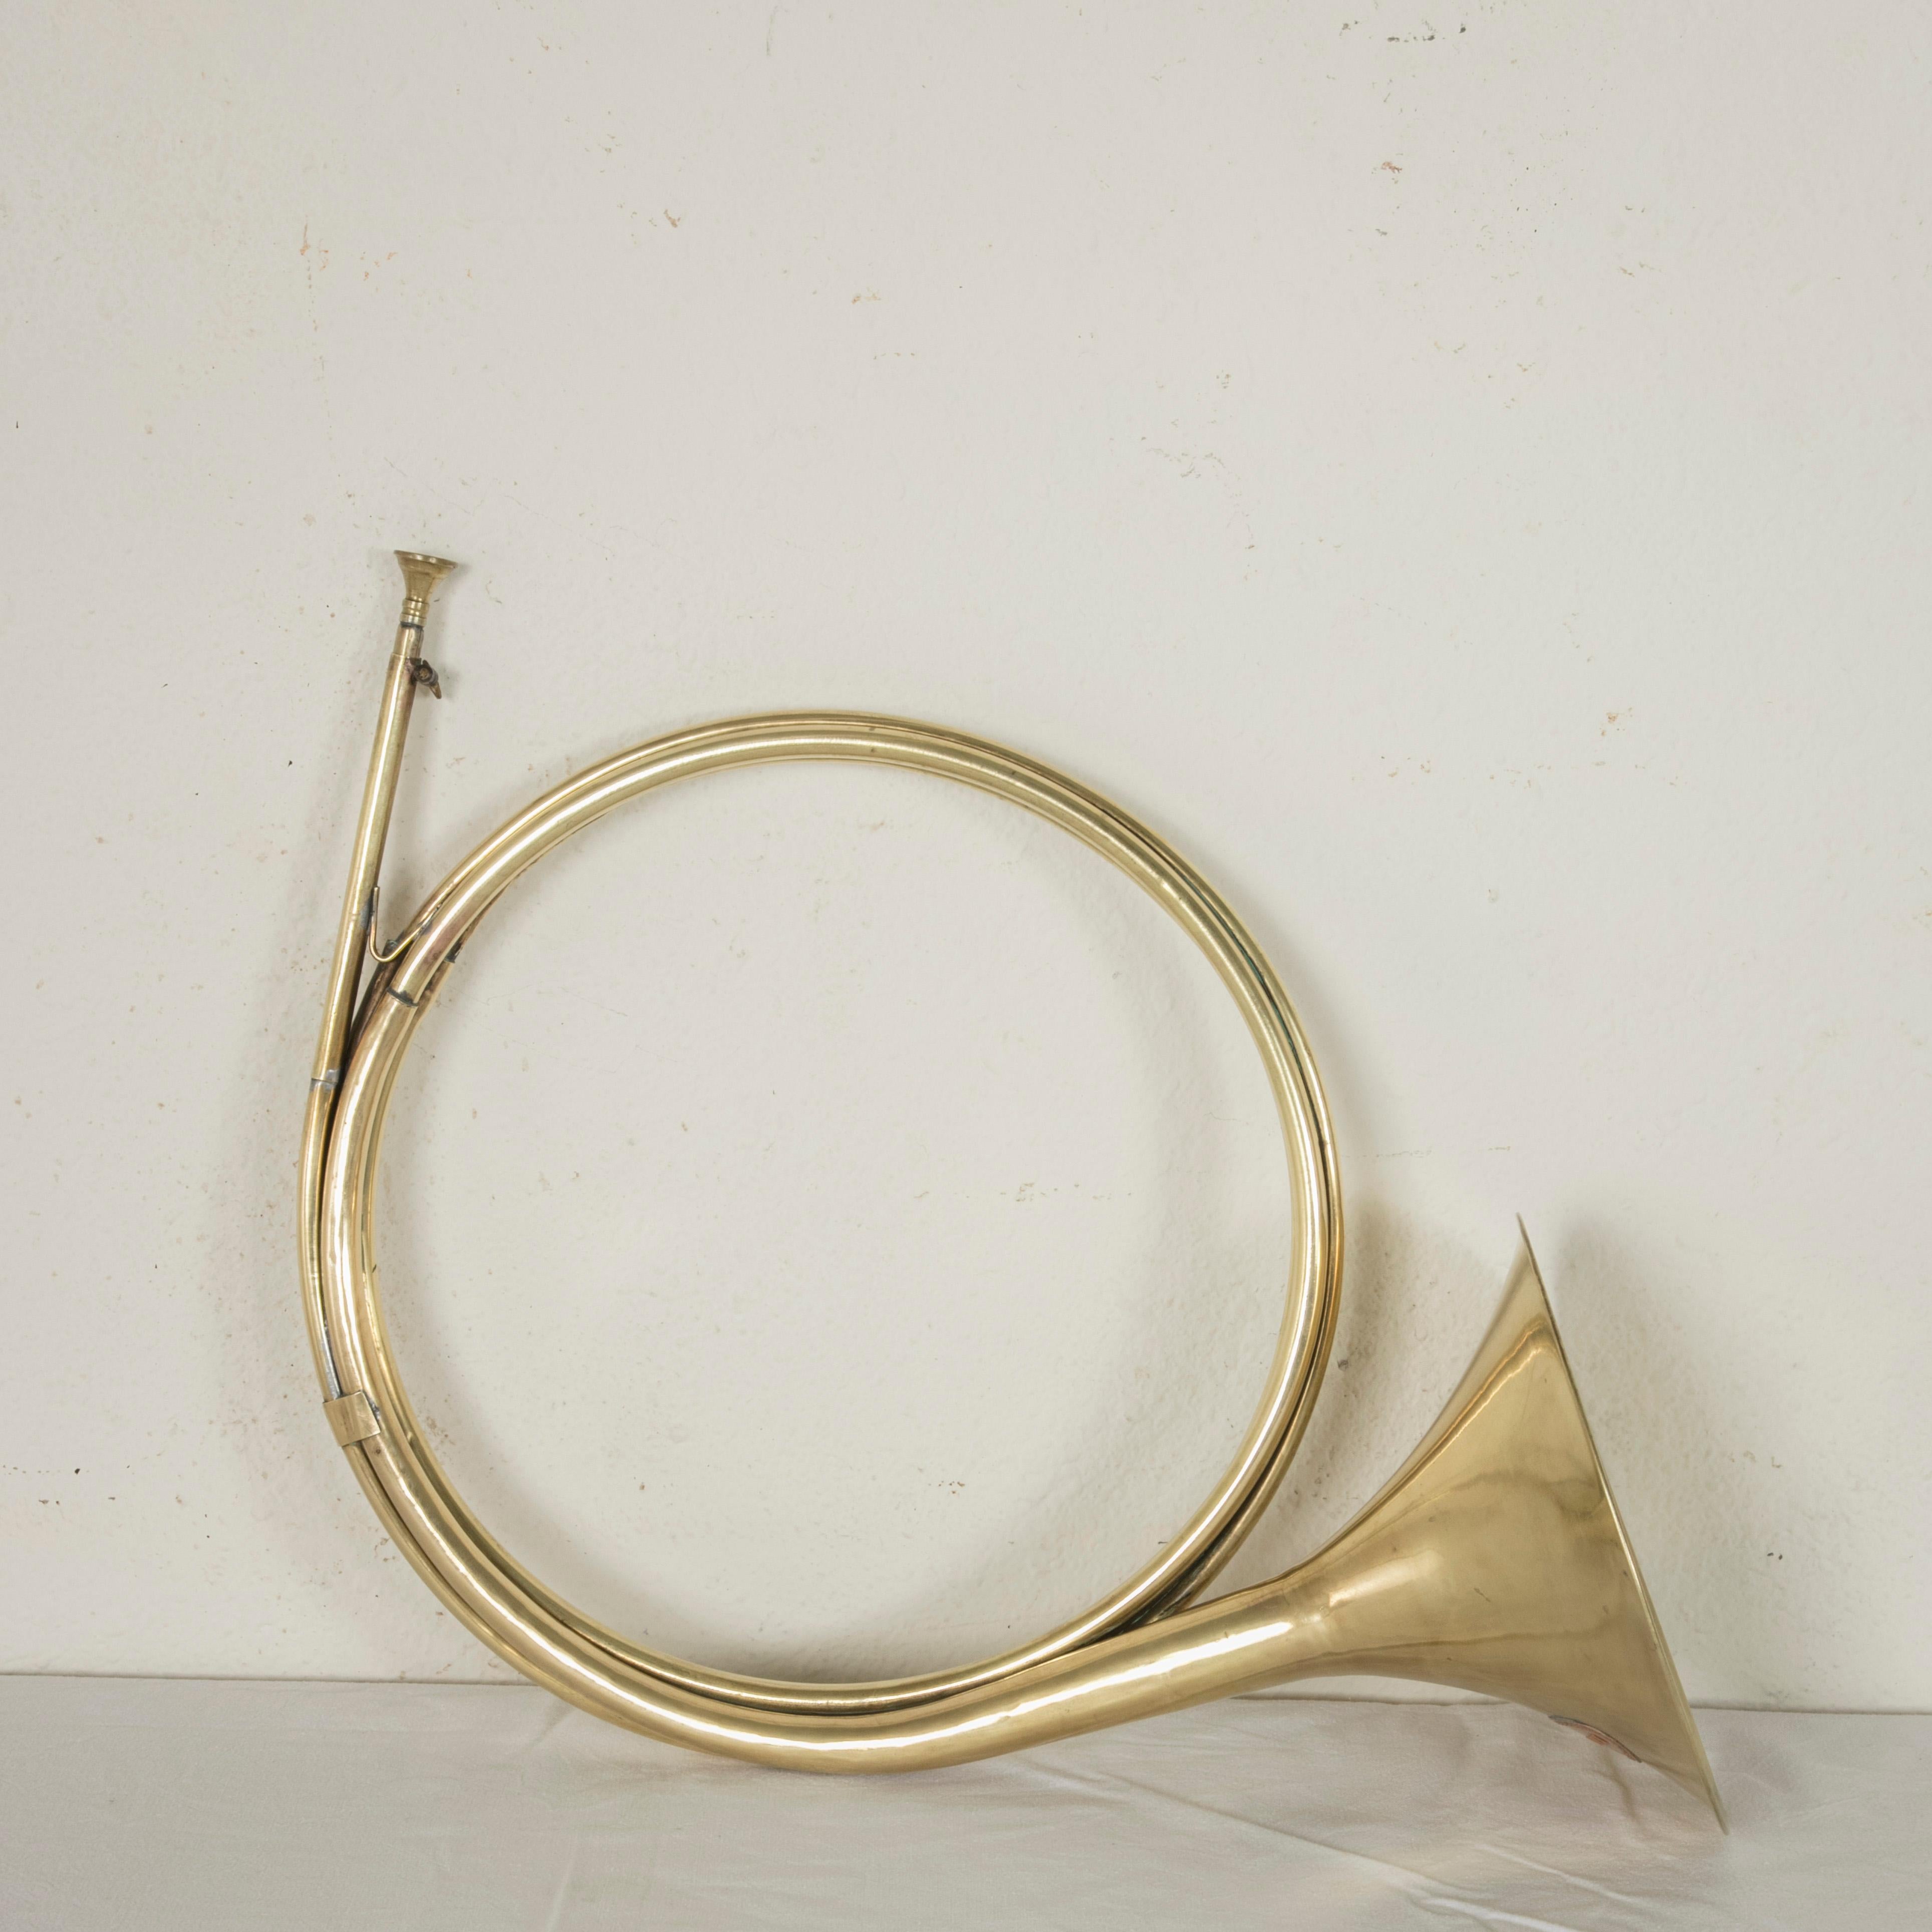 This early 20th century brass horn or coronet was originally used for hunting on the grounds of the Chateau de Chantilly, north of Paris. A copper plaque with a border of beading is marked Chantilly, circa 1910.  The circular part of the horn is 16